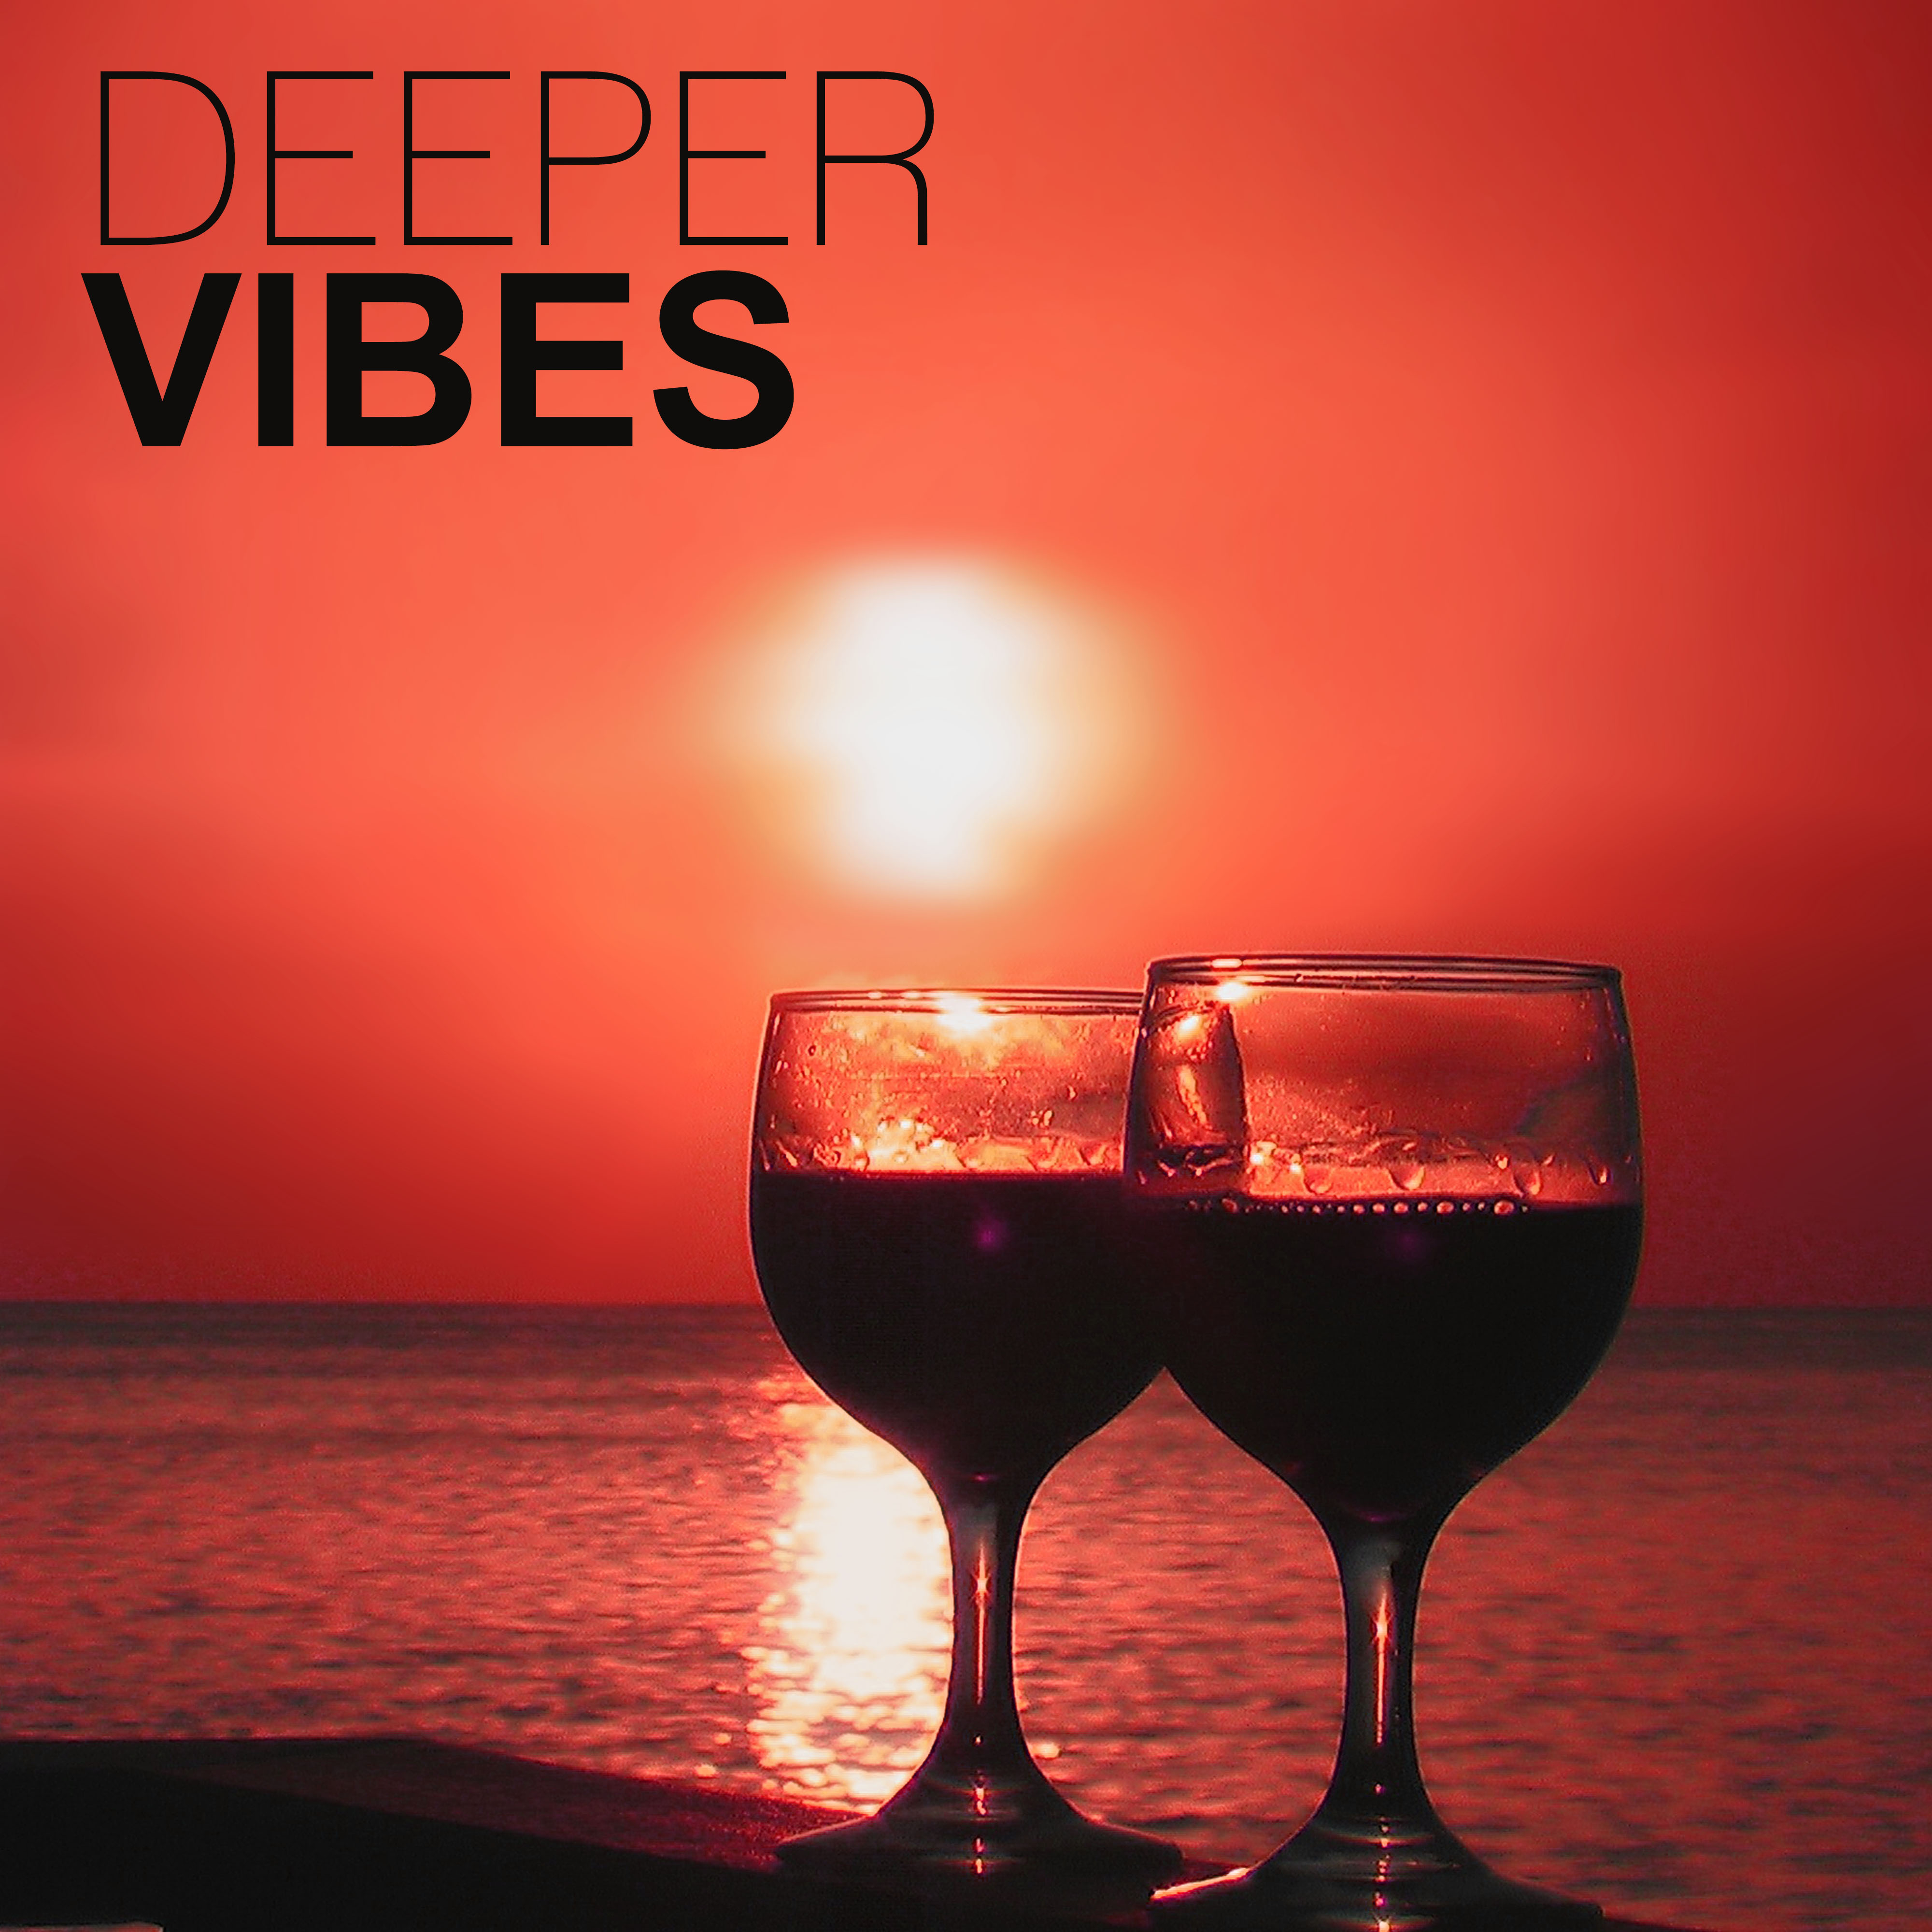 Deeper Vibes  Summertime, Chill Out Sounds, Rest